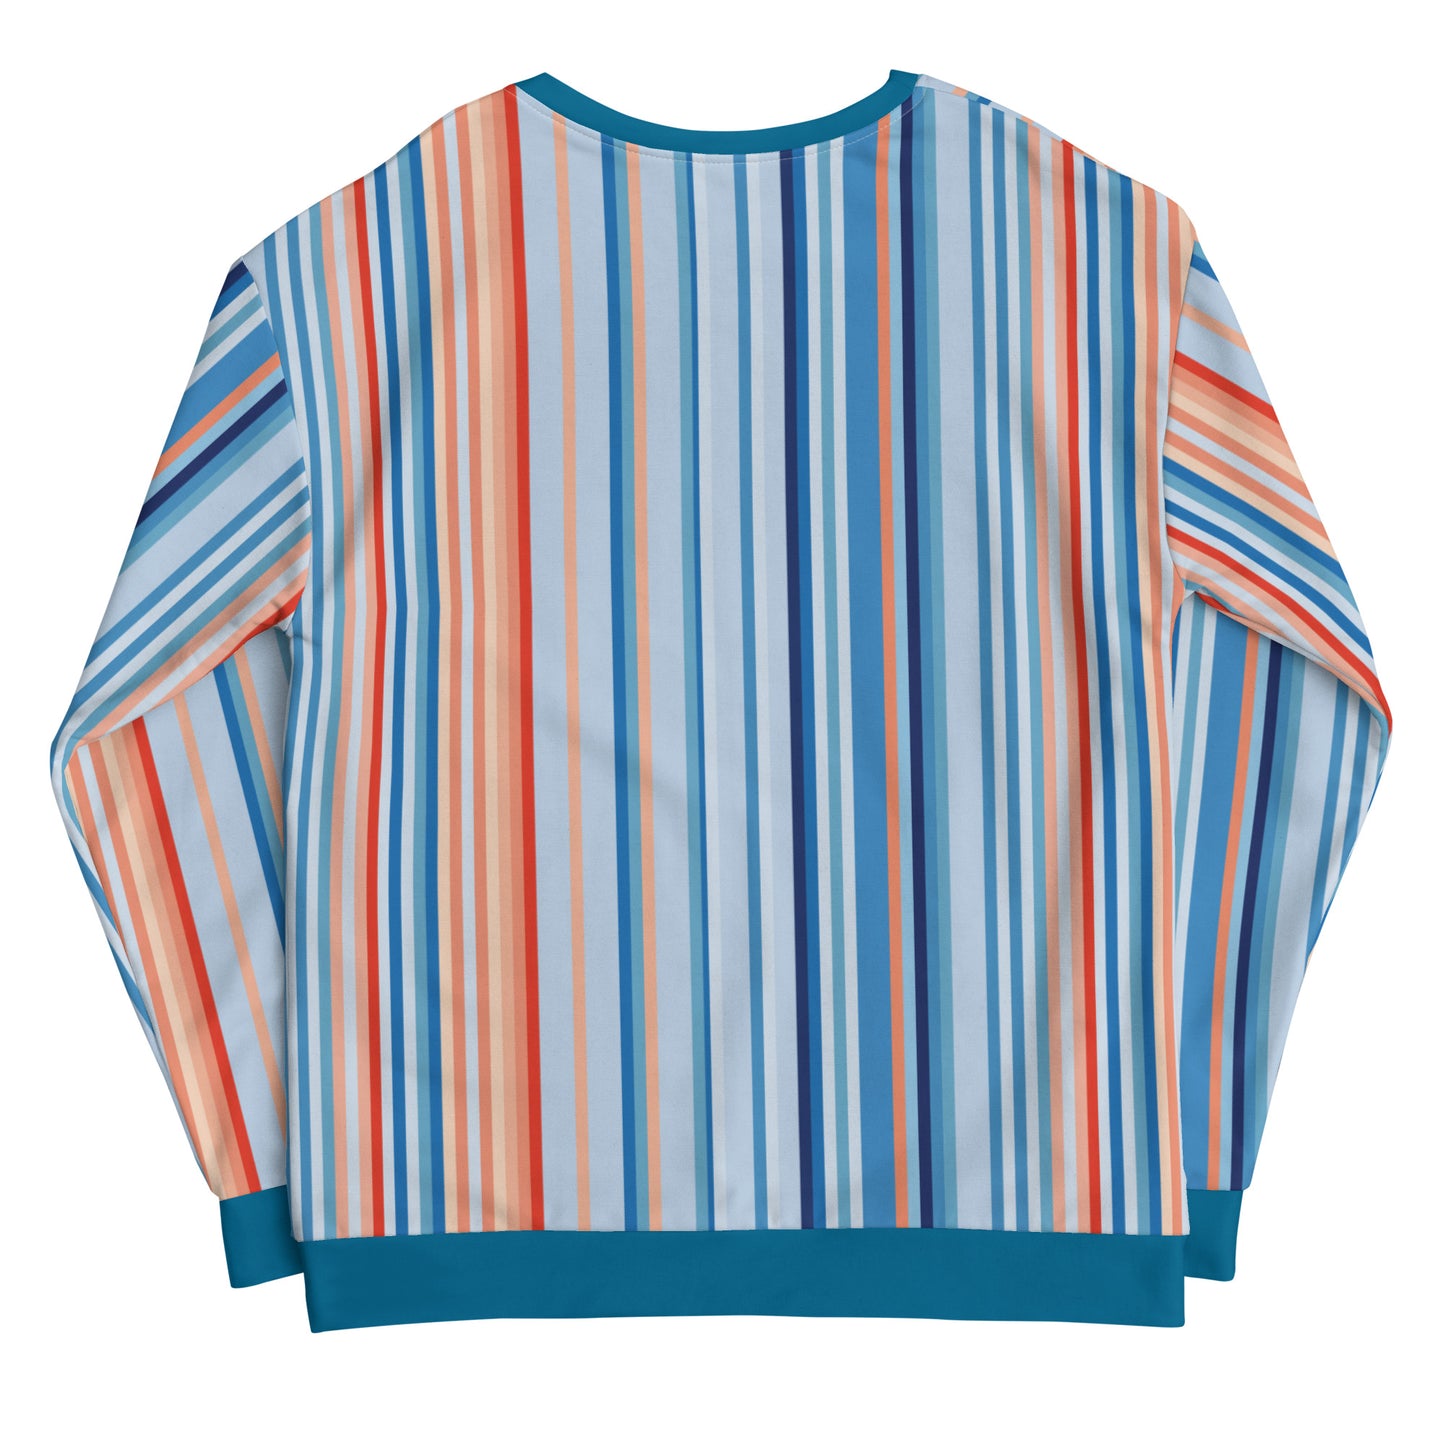 Climate Change Global Warming Stripes - Sustainably Made Sweatshirt Vertical